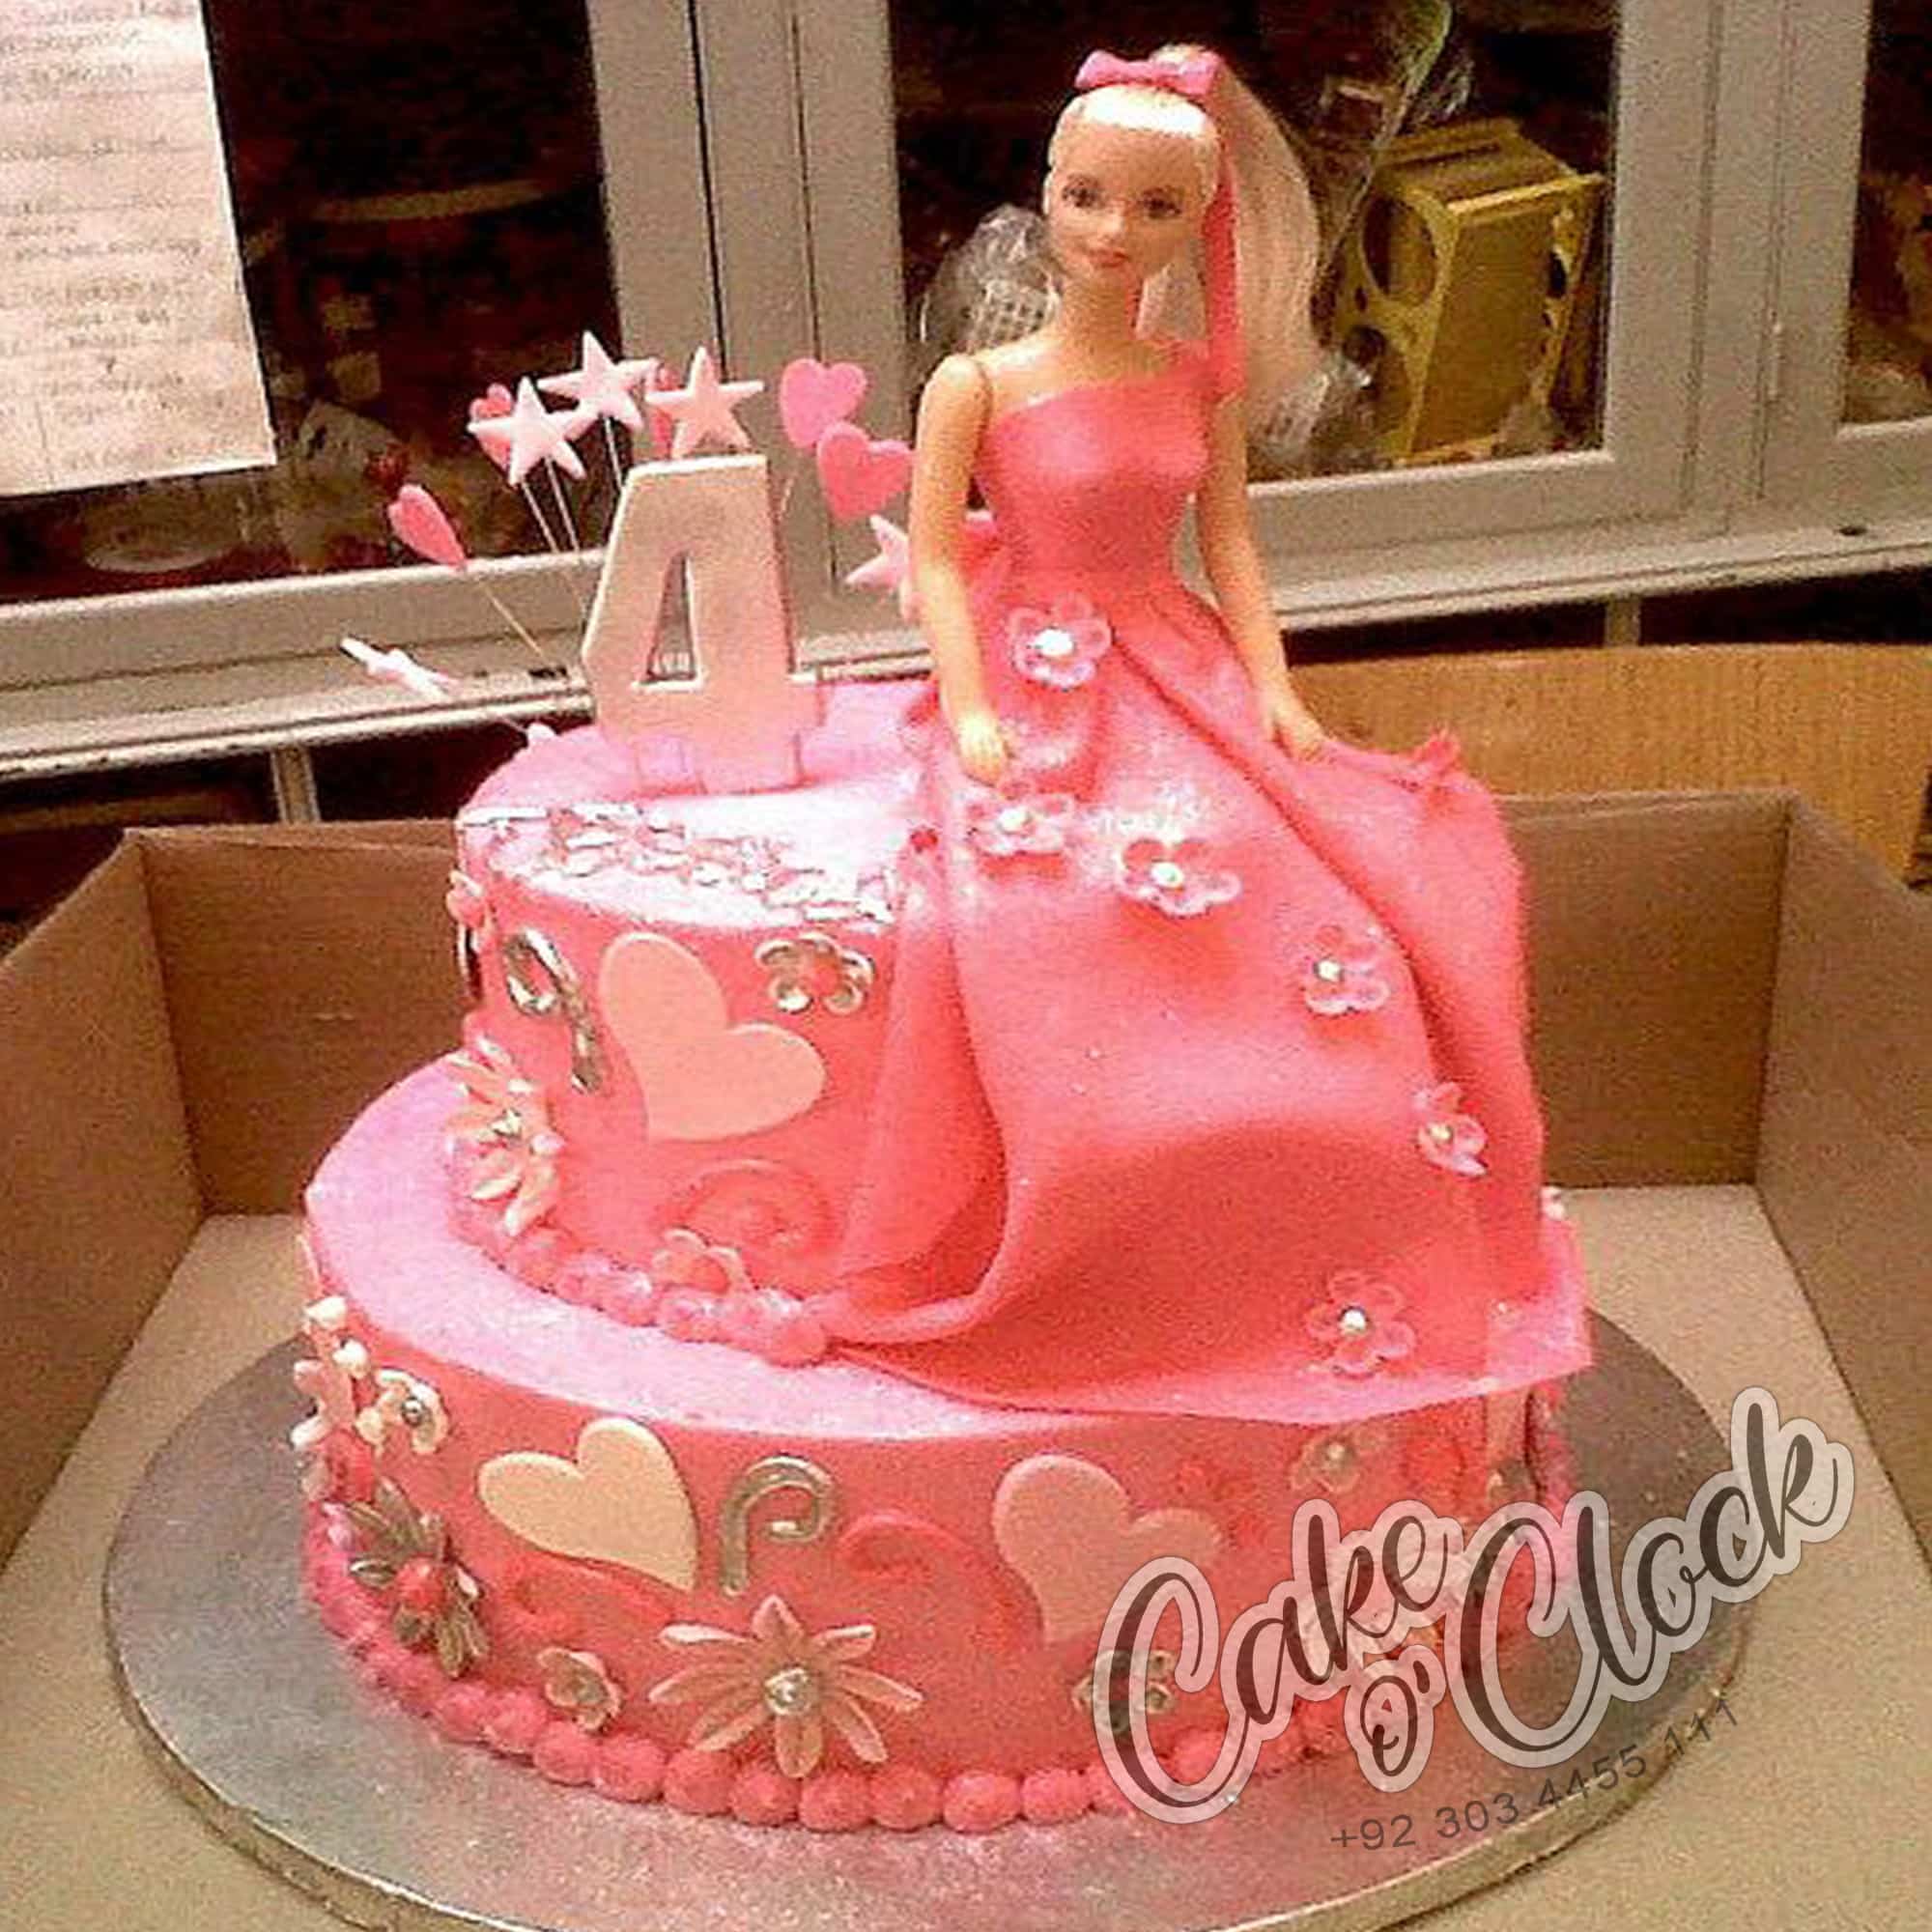 Barbie Dolly Varden Cake – The Cake People